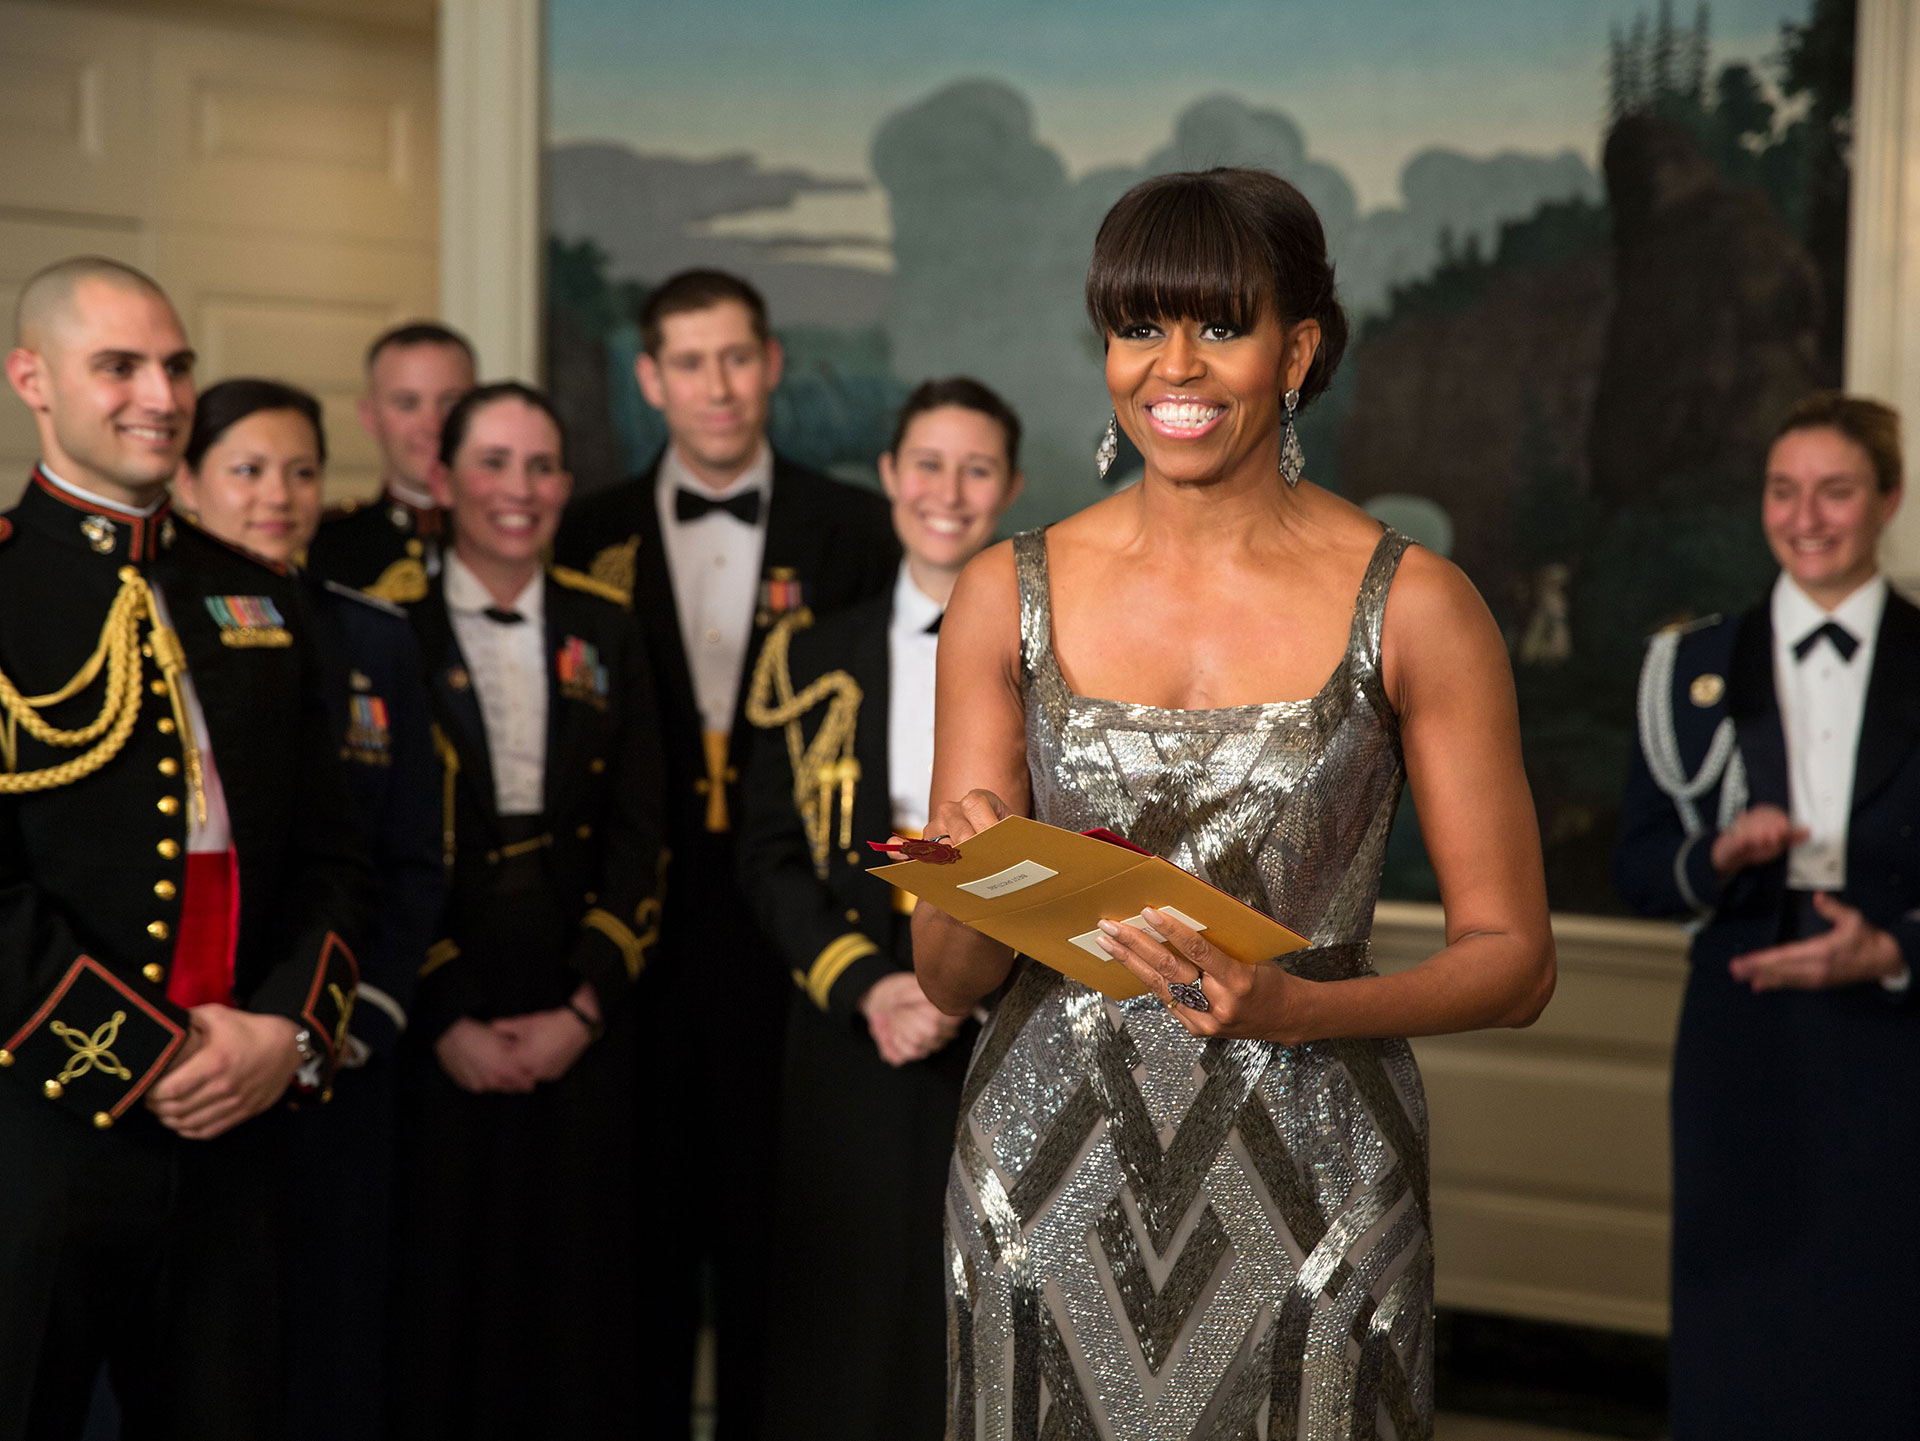 Michelle Obama presents at the Oscars